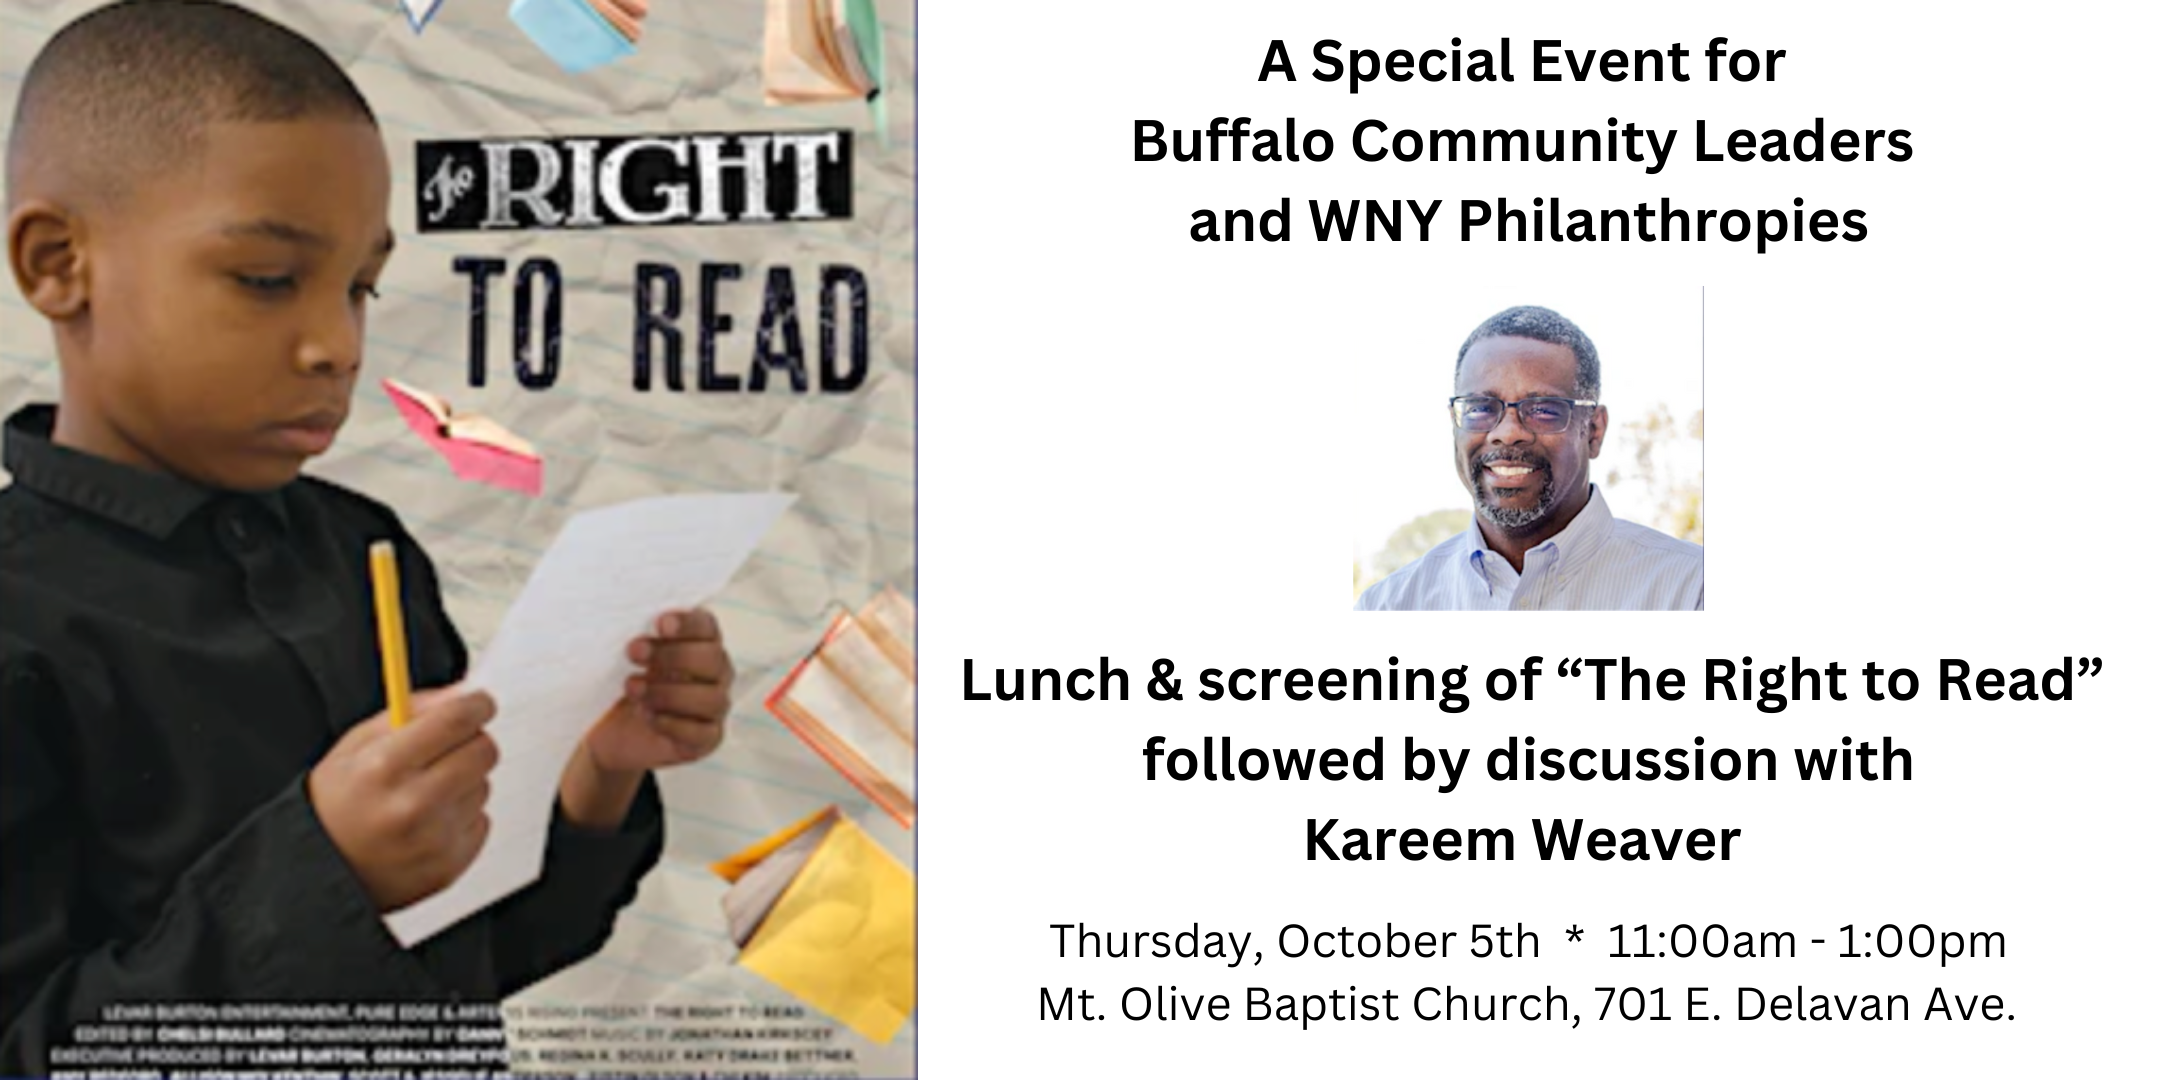 Screening of "The Right to Read" & Discussion with Kareem Weaver: For Philanthropies & Community Leaders Image